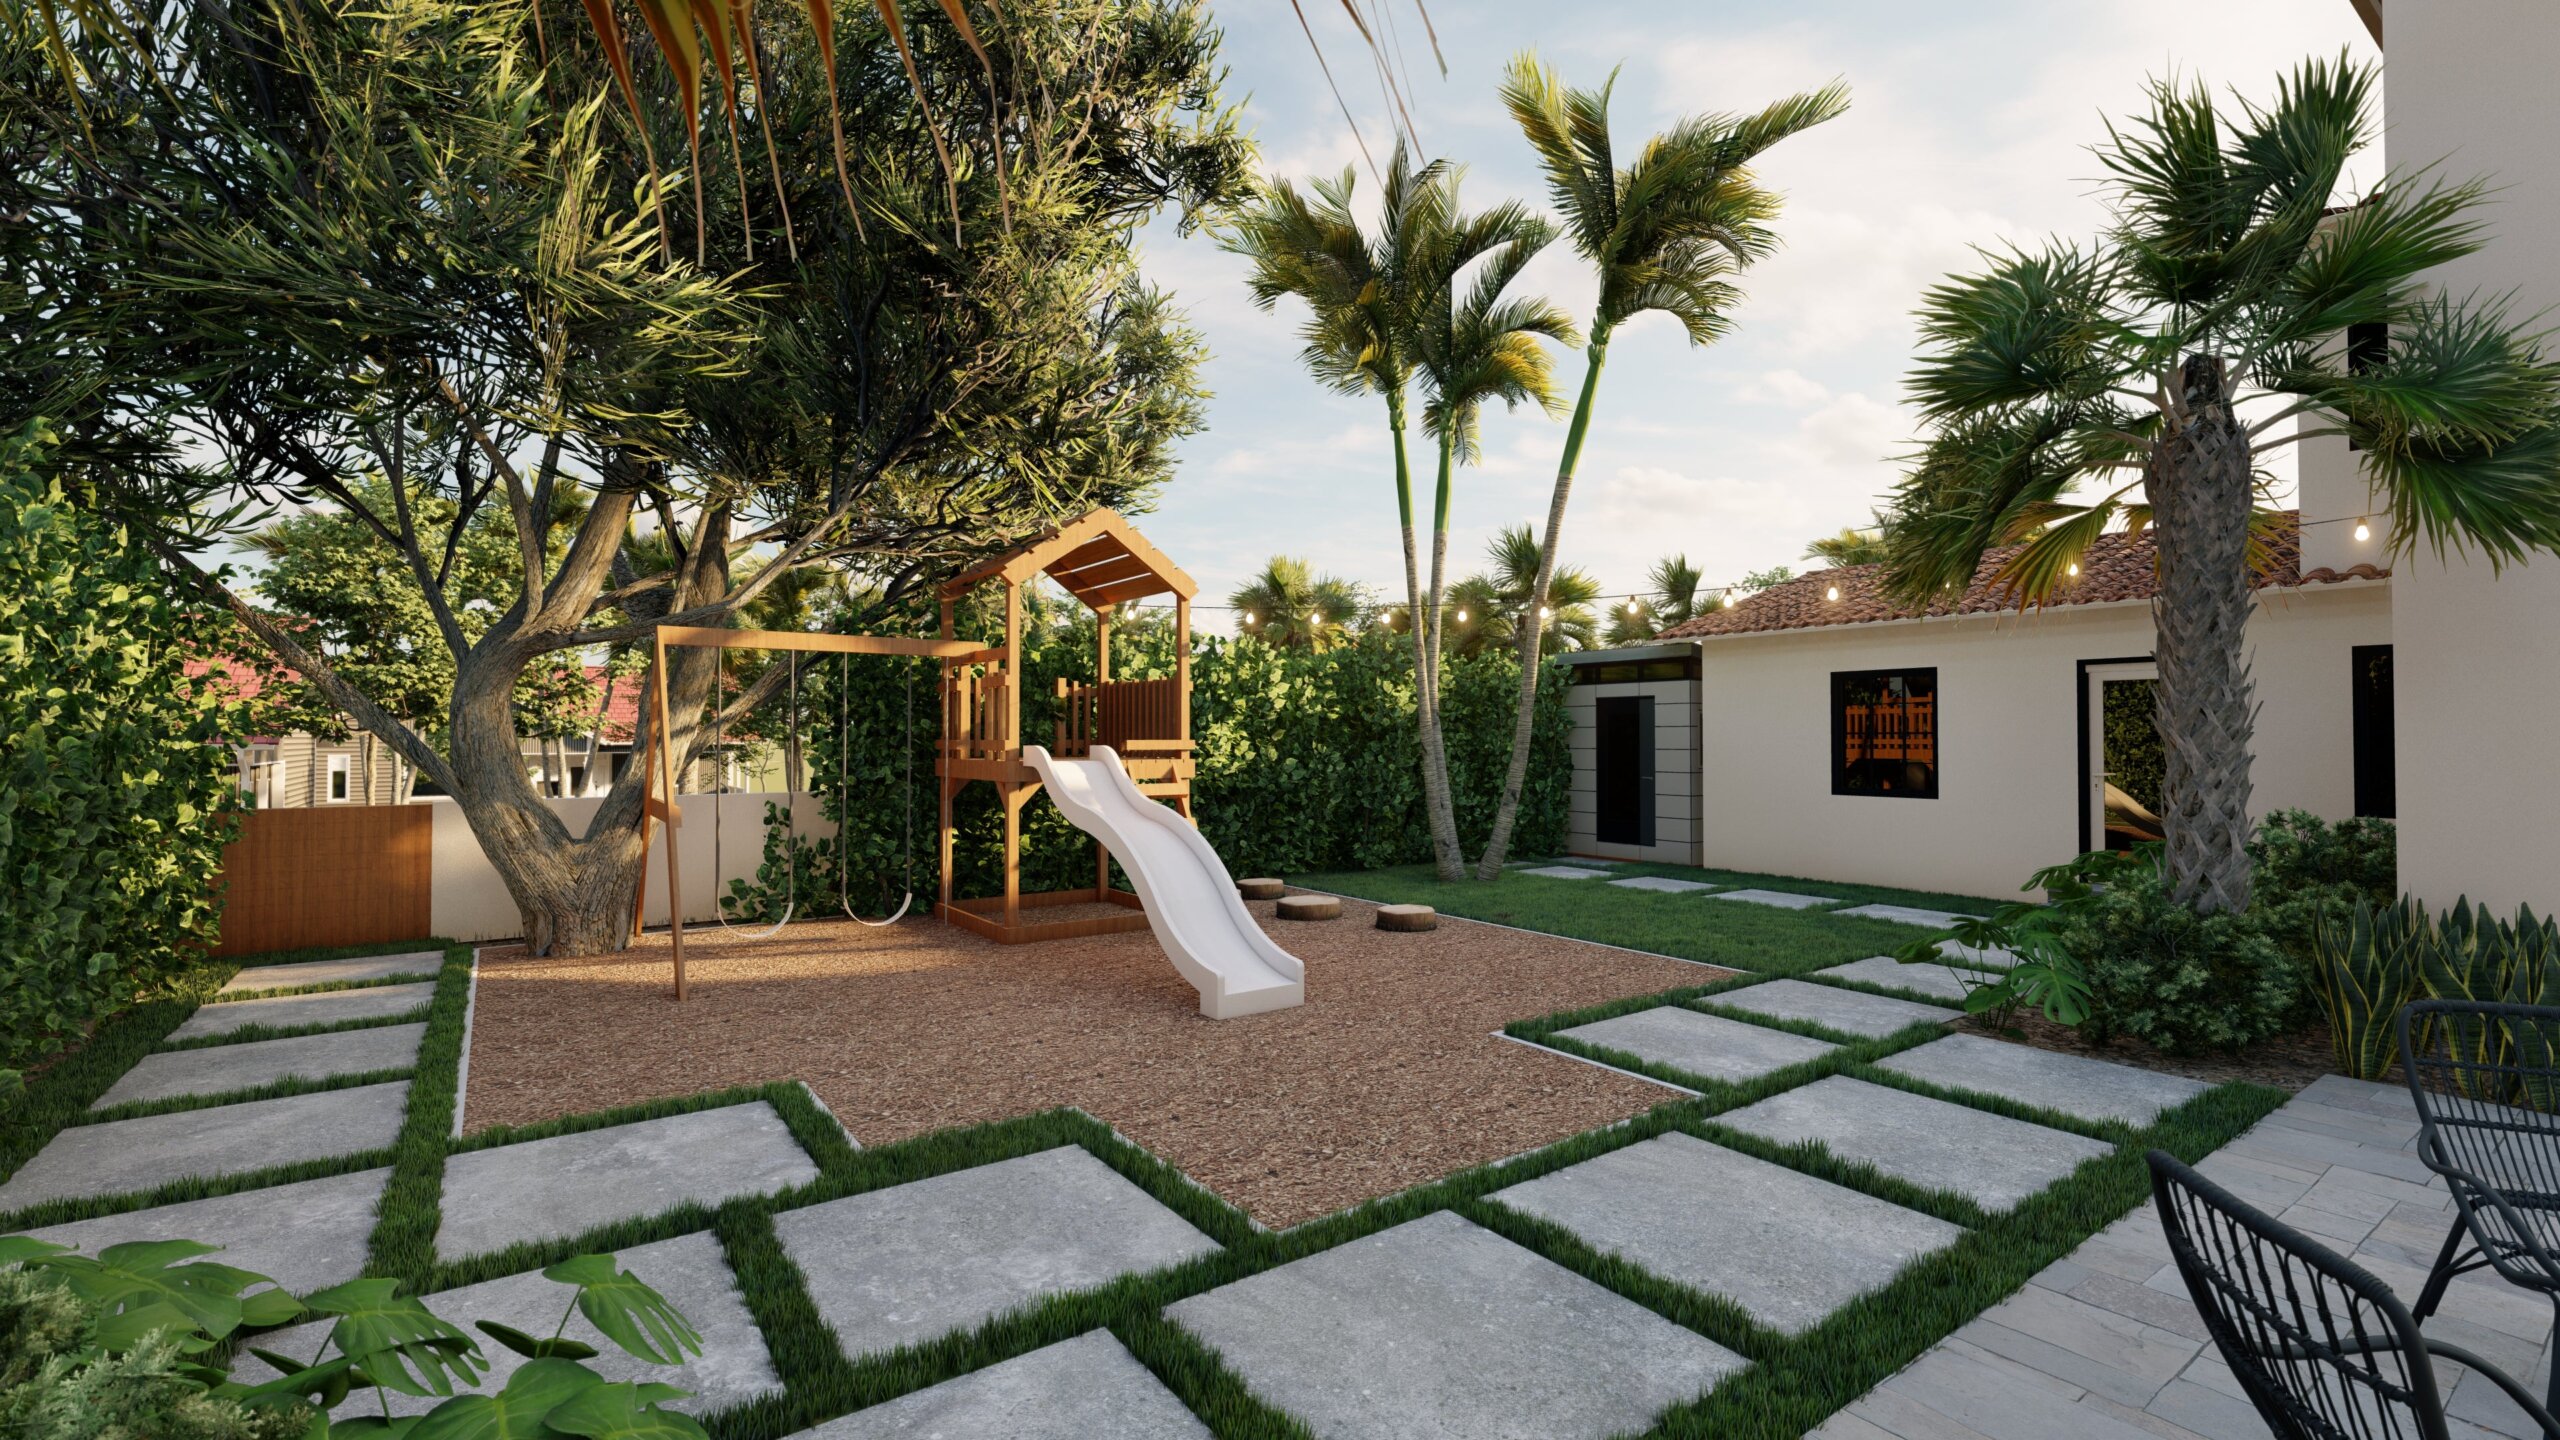 Tropical backyard with kid's play area with slide and swings